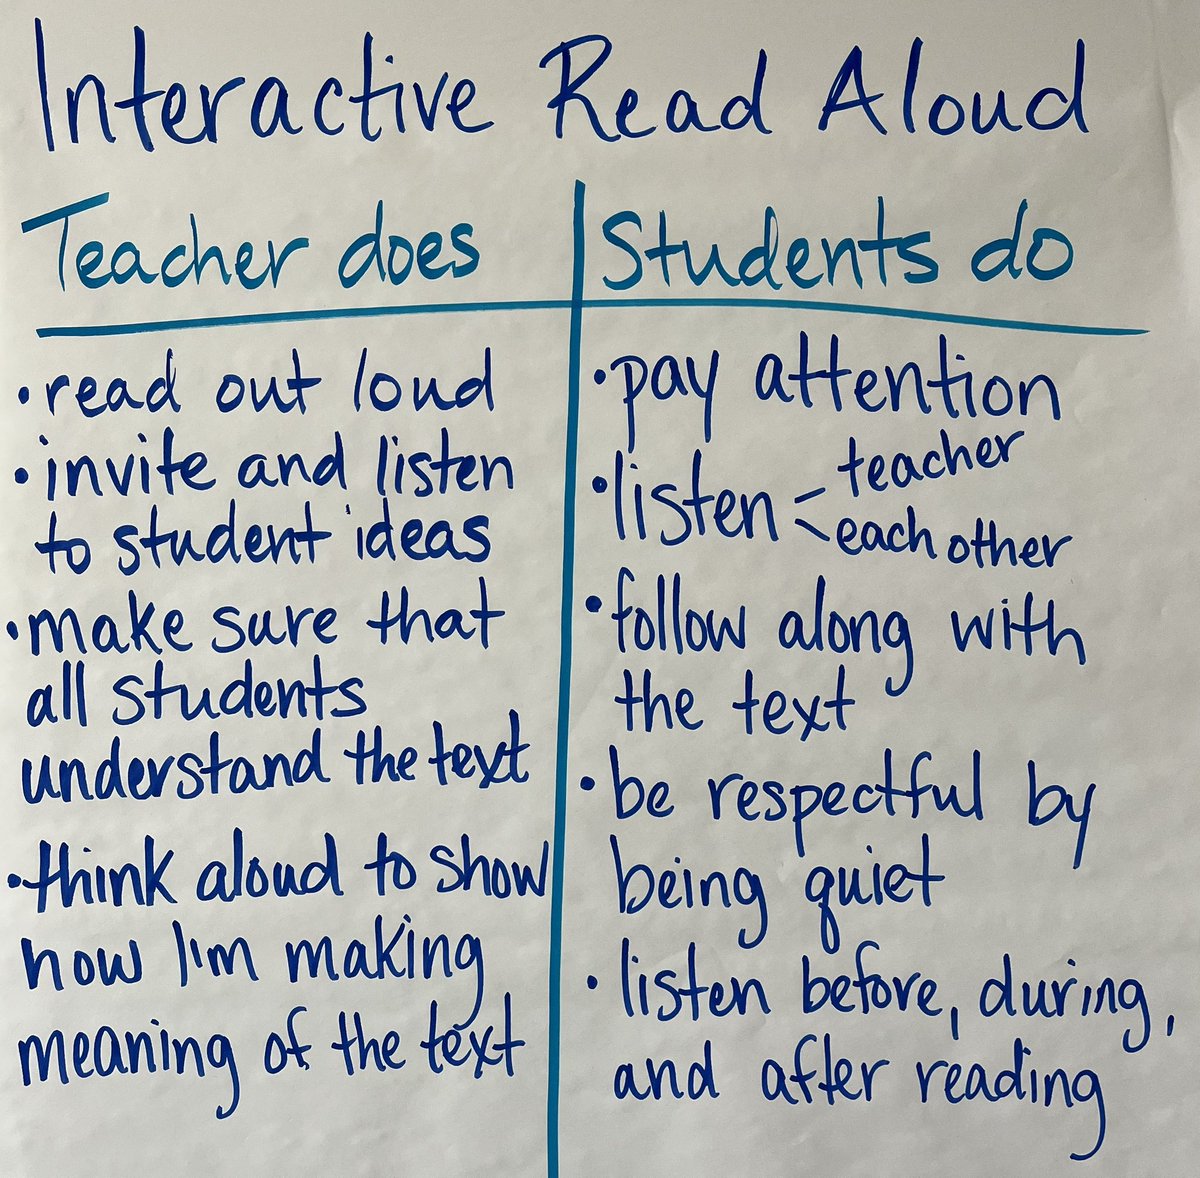 Student-generated expectations for interactive read-aloud #literacyandjusticeforall @BISHuskyPride